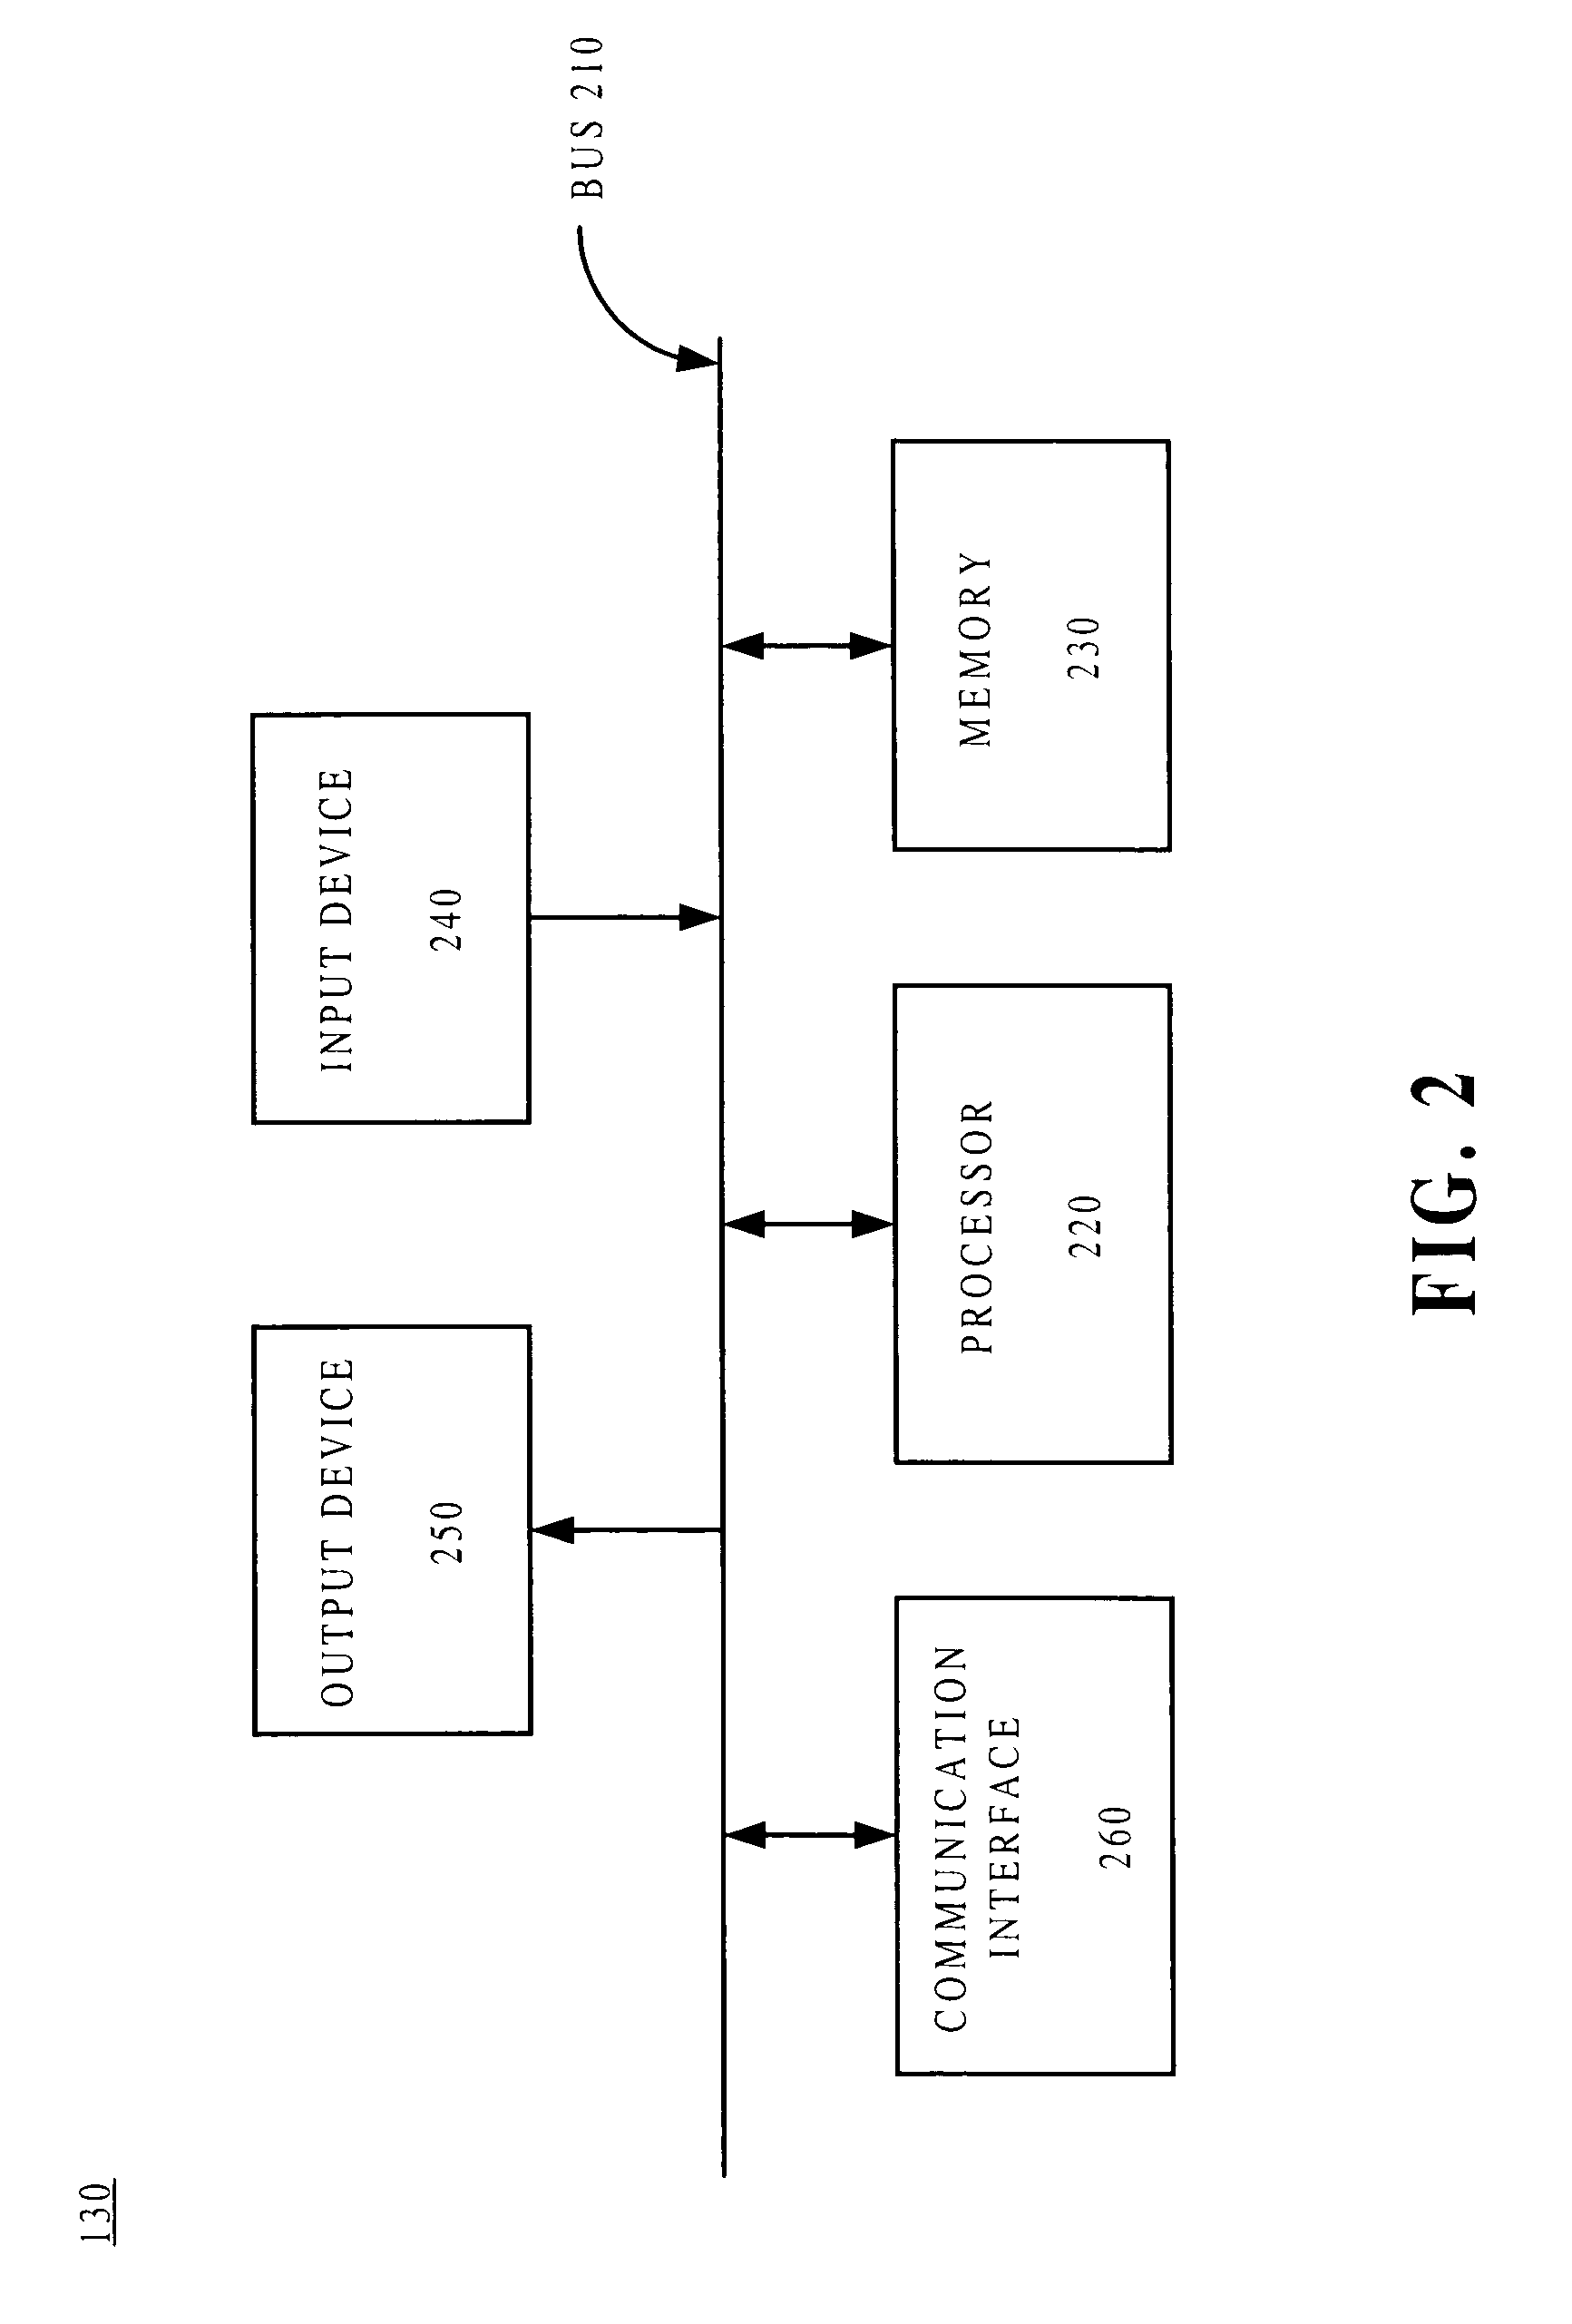 Systems and methods for managing faults in a network